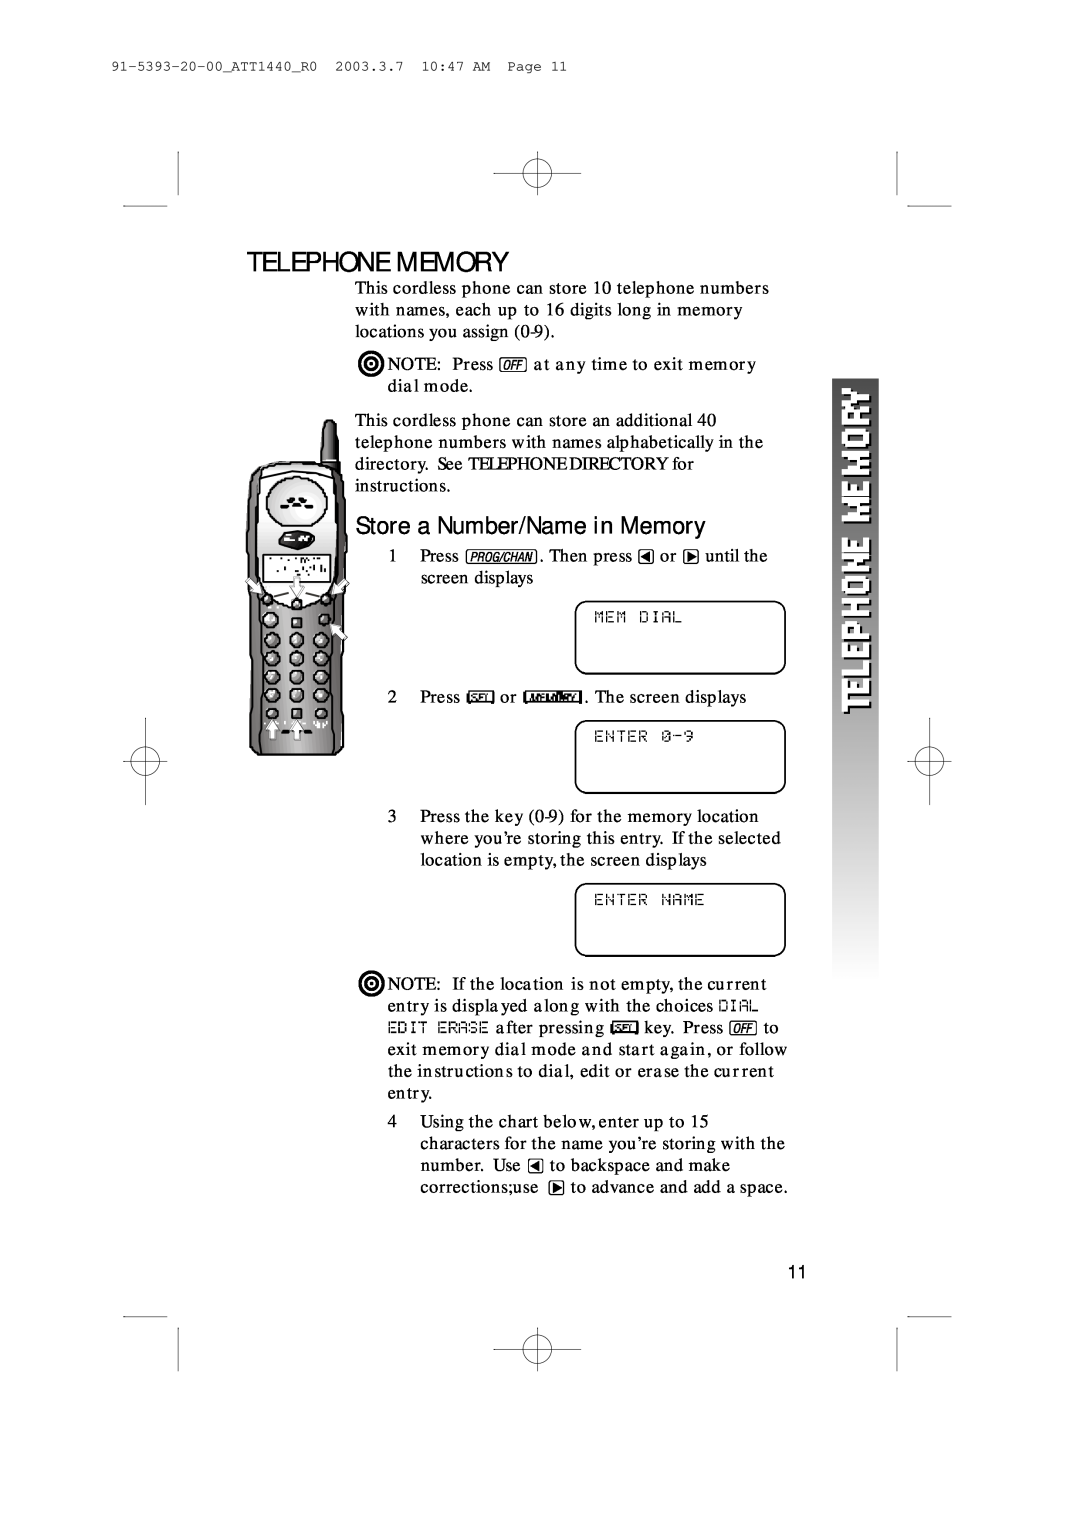 AT&T 1440 user manual Telephone Memory, Store a Number/Name in Memory, ¥NOTE Press at any time to exit memory dial mode 